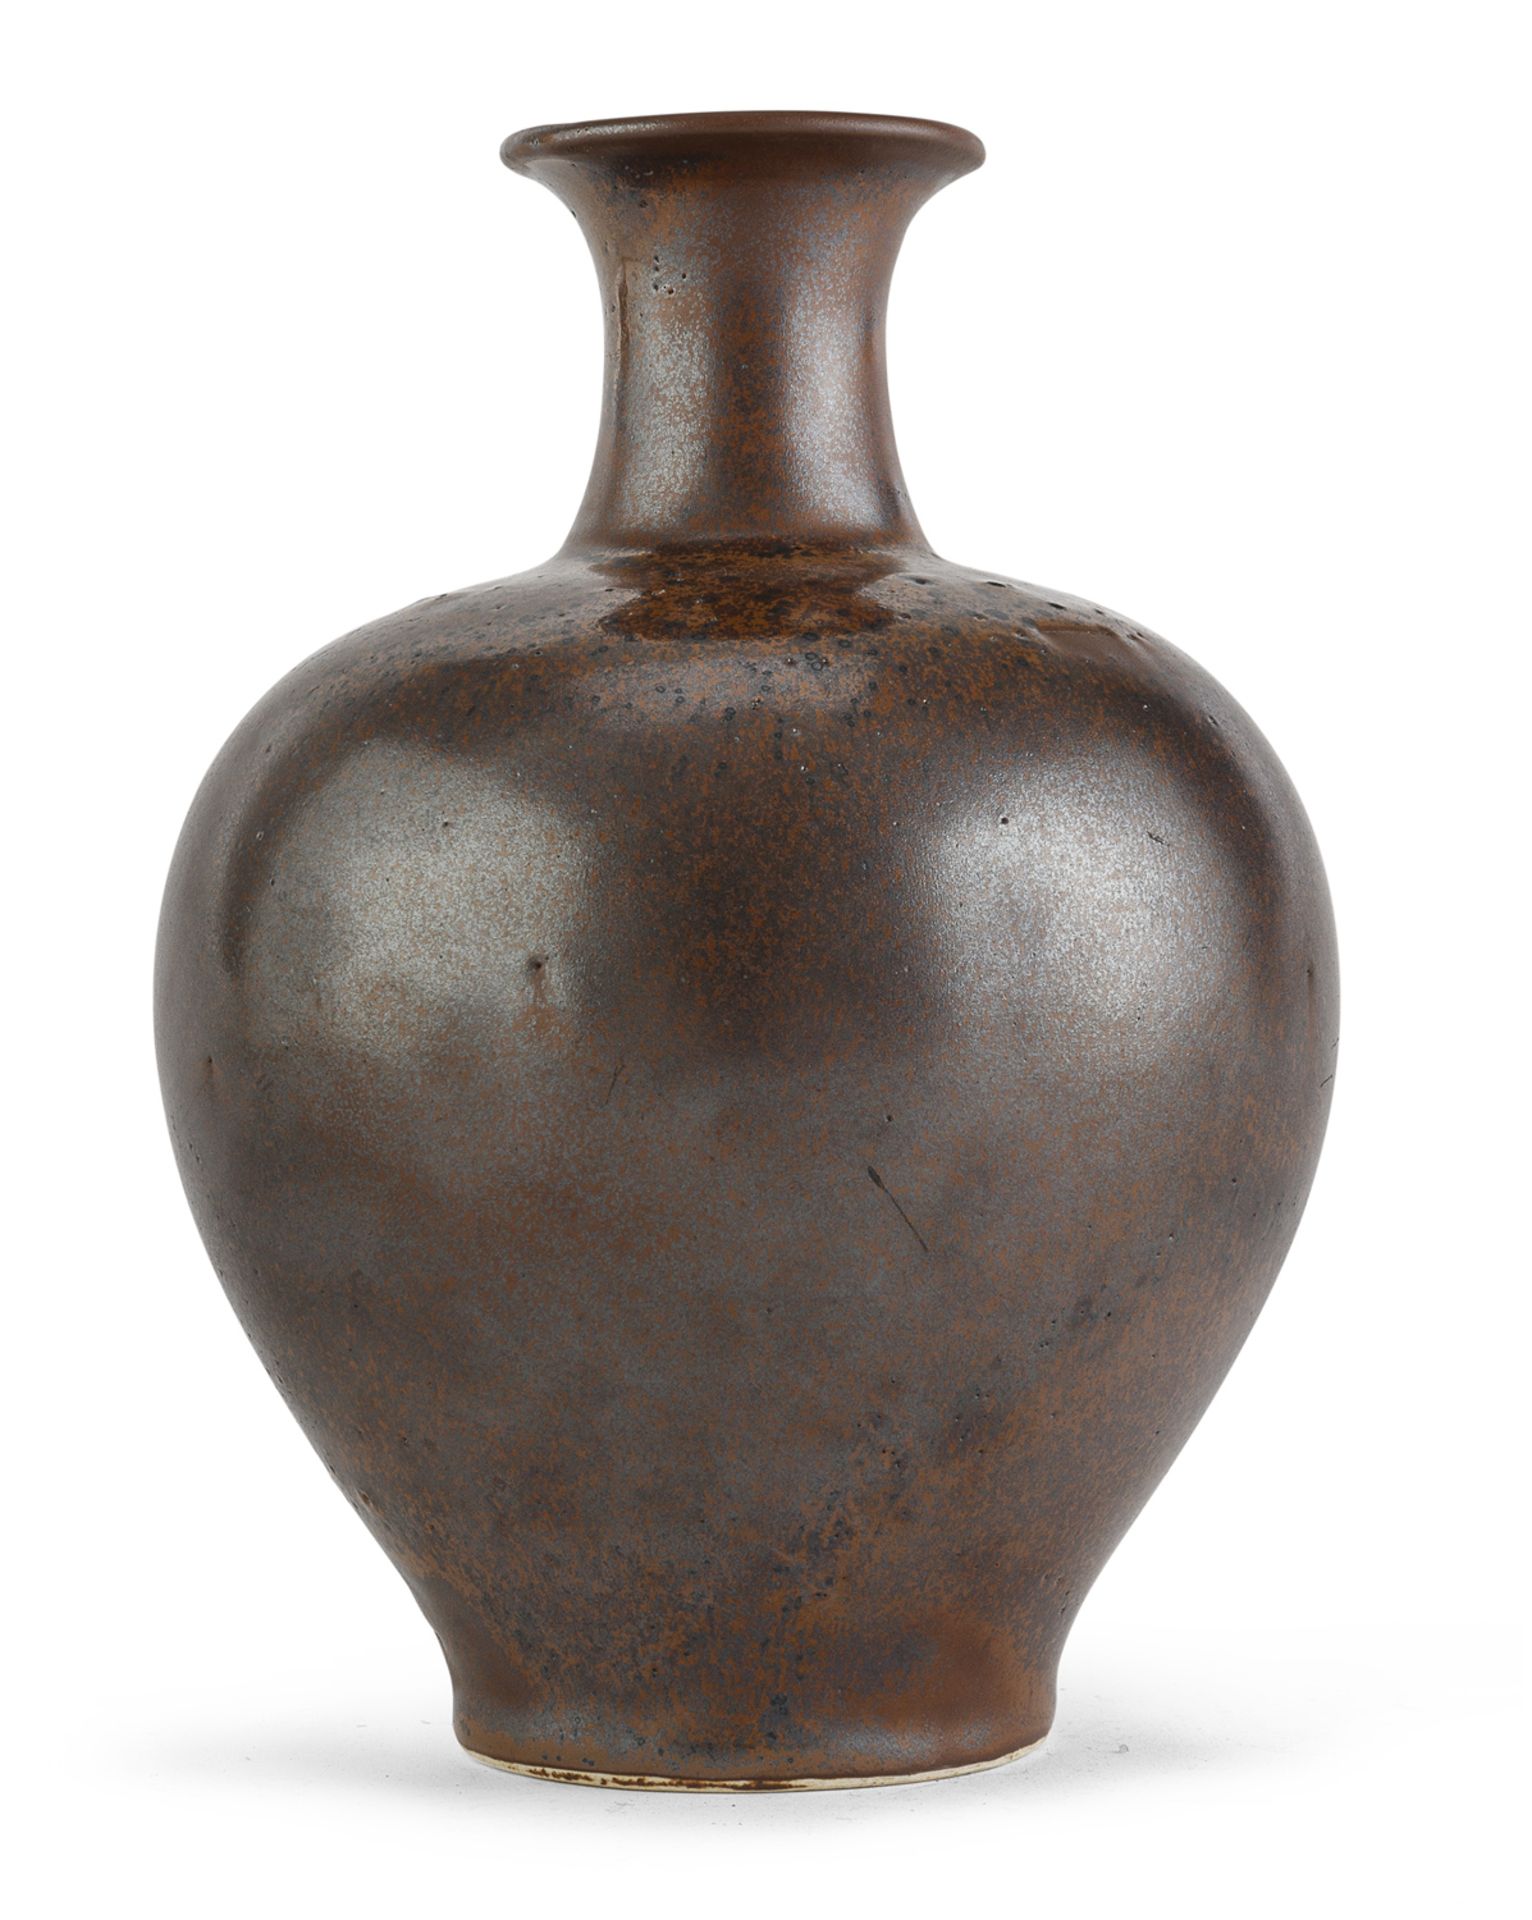 A CHINESE BROWN GLAZED PORCELAIN VASE 17TH CENTURY.